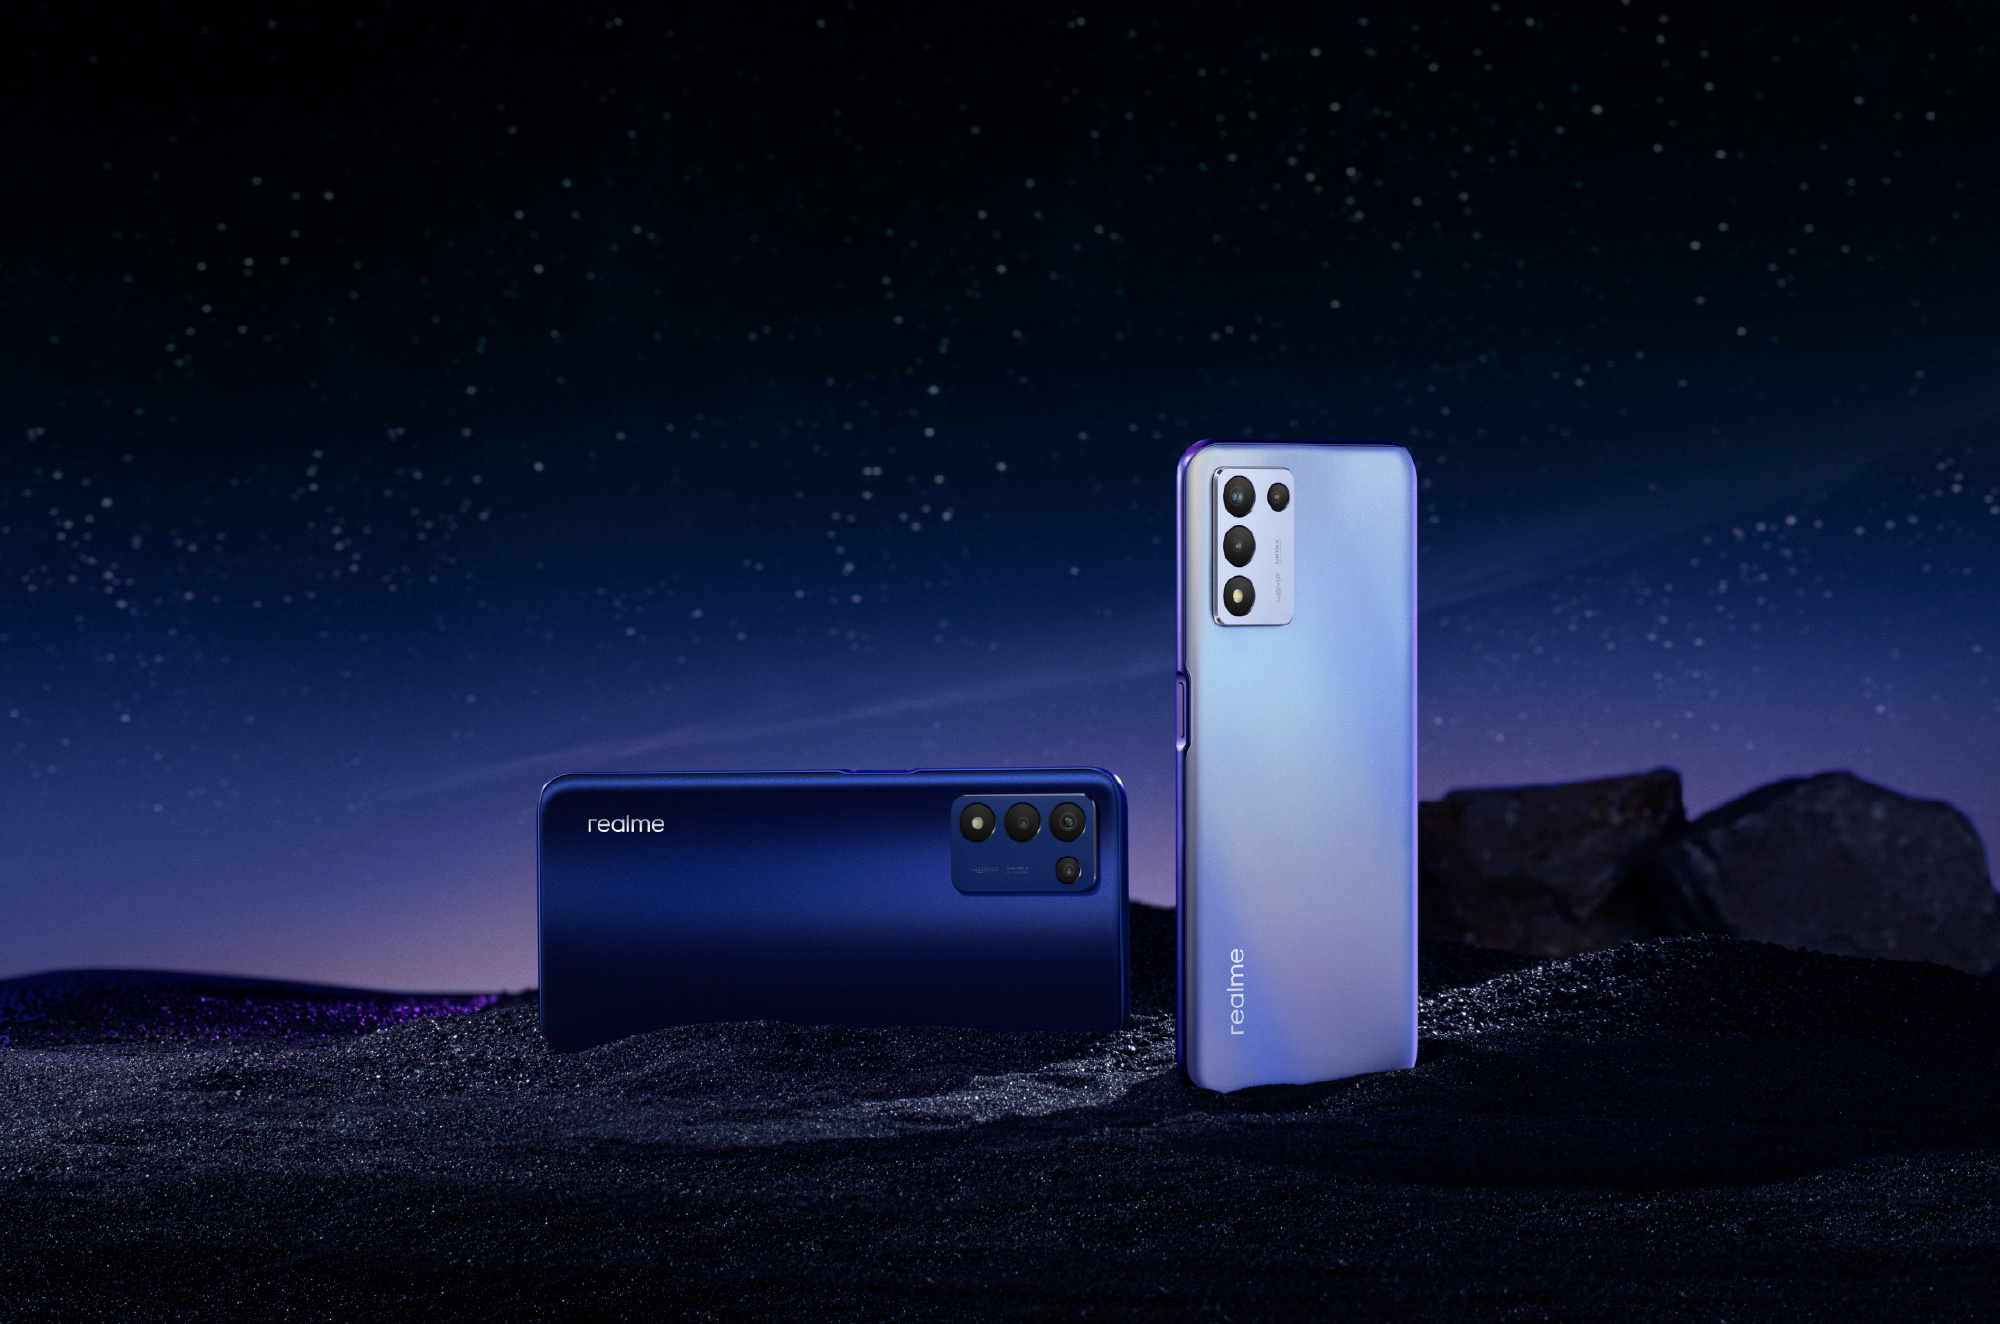 Realme sold 1 million smartphones in a week. Target of 10 million by the end of the year